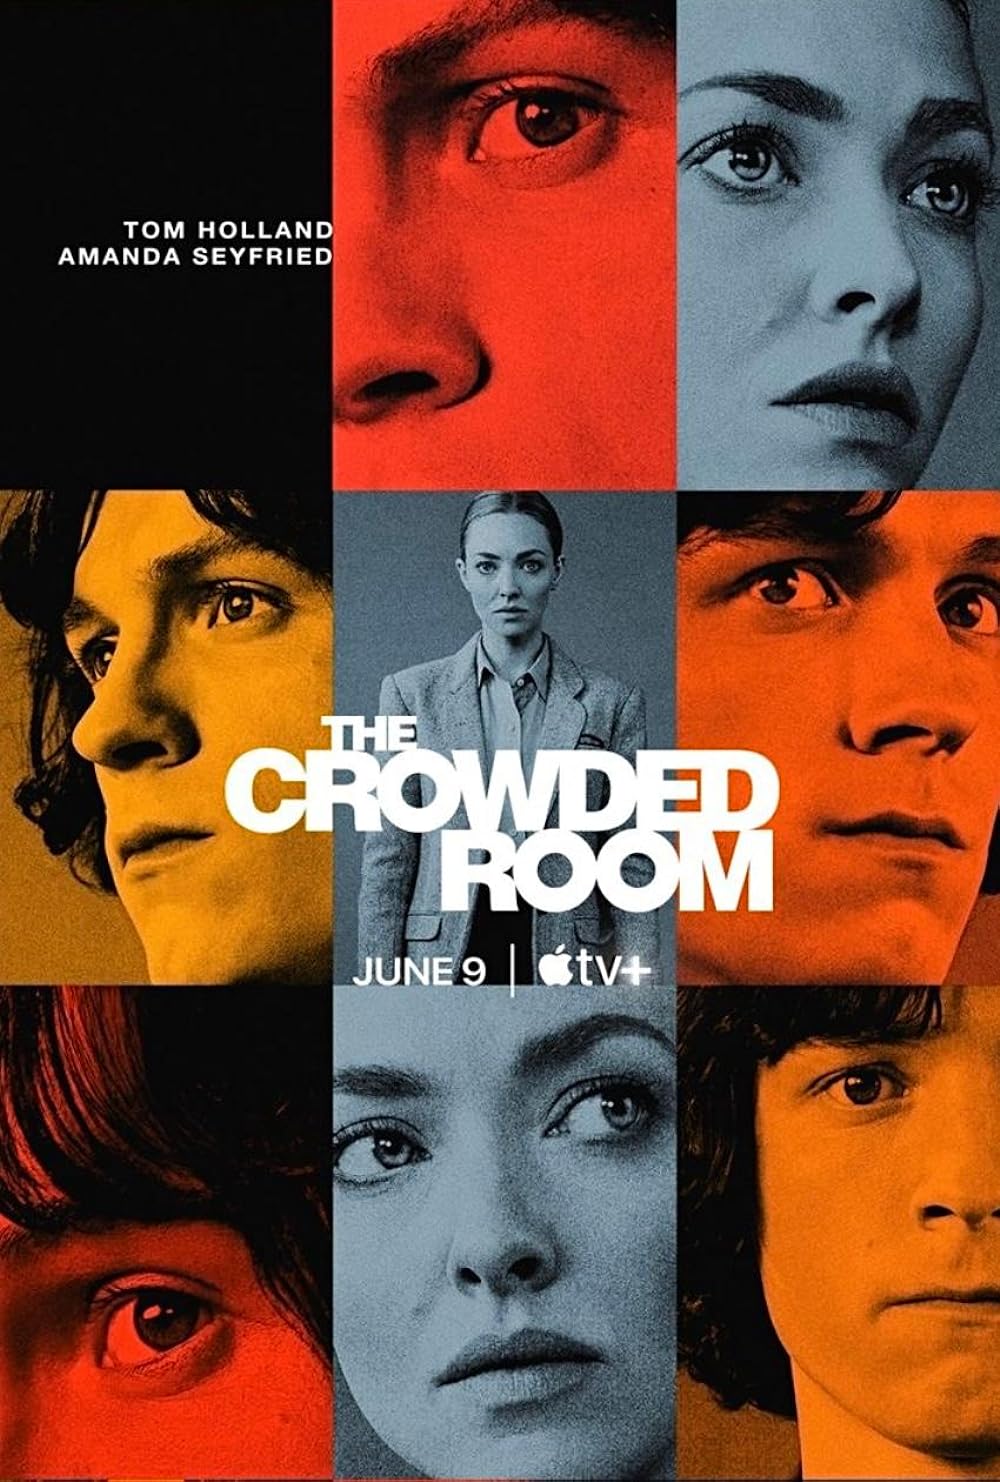 The Crowded Room met Tom Holland